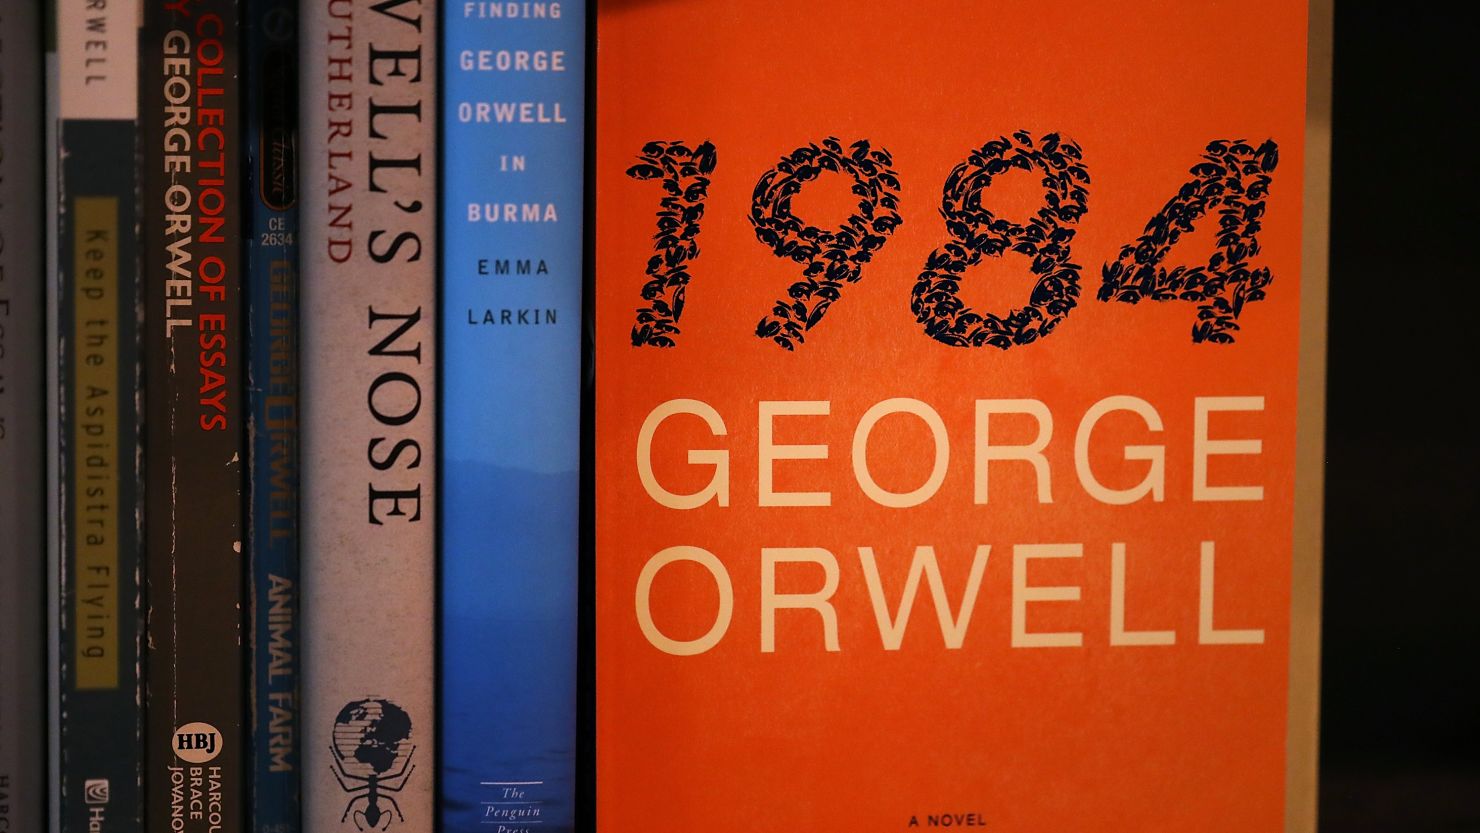 George Orwell's tale of government surveillance, Big Brother and newspeak hits Broadway this summer.